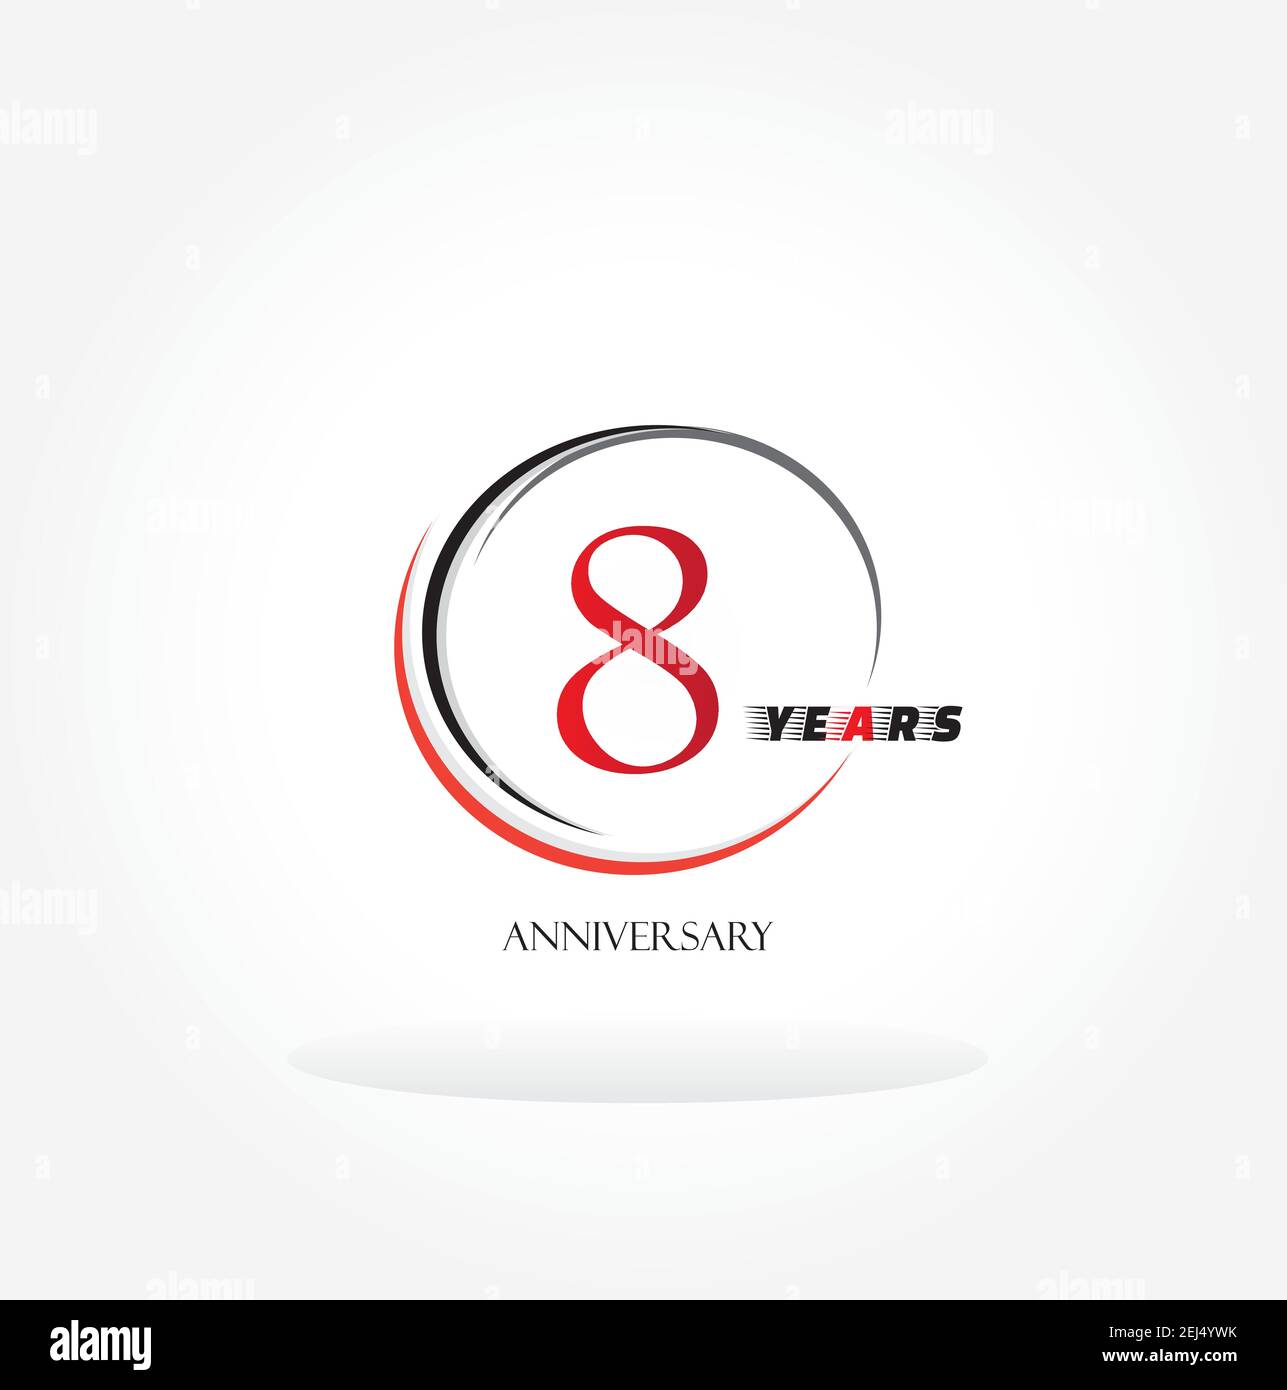 8 years anniversary linked logotype with red color isolated on white background for company celebration event Stock Vector